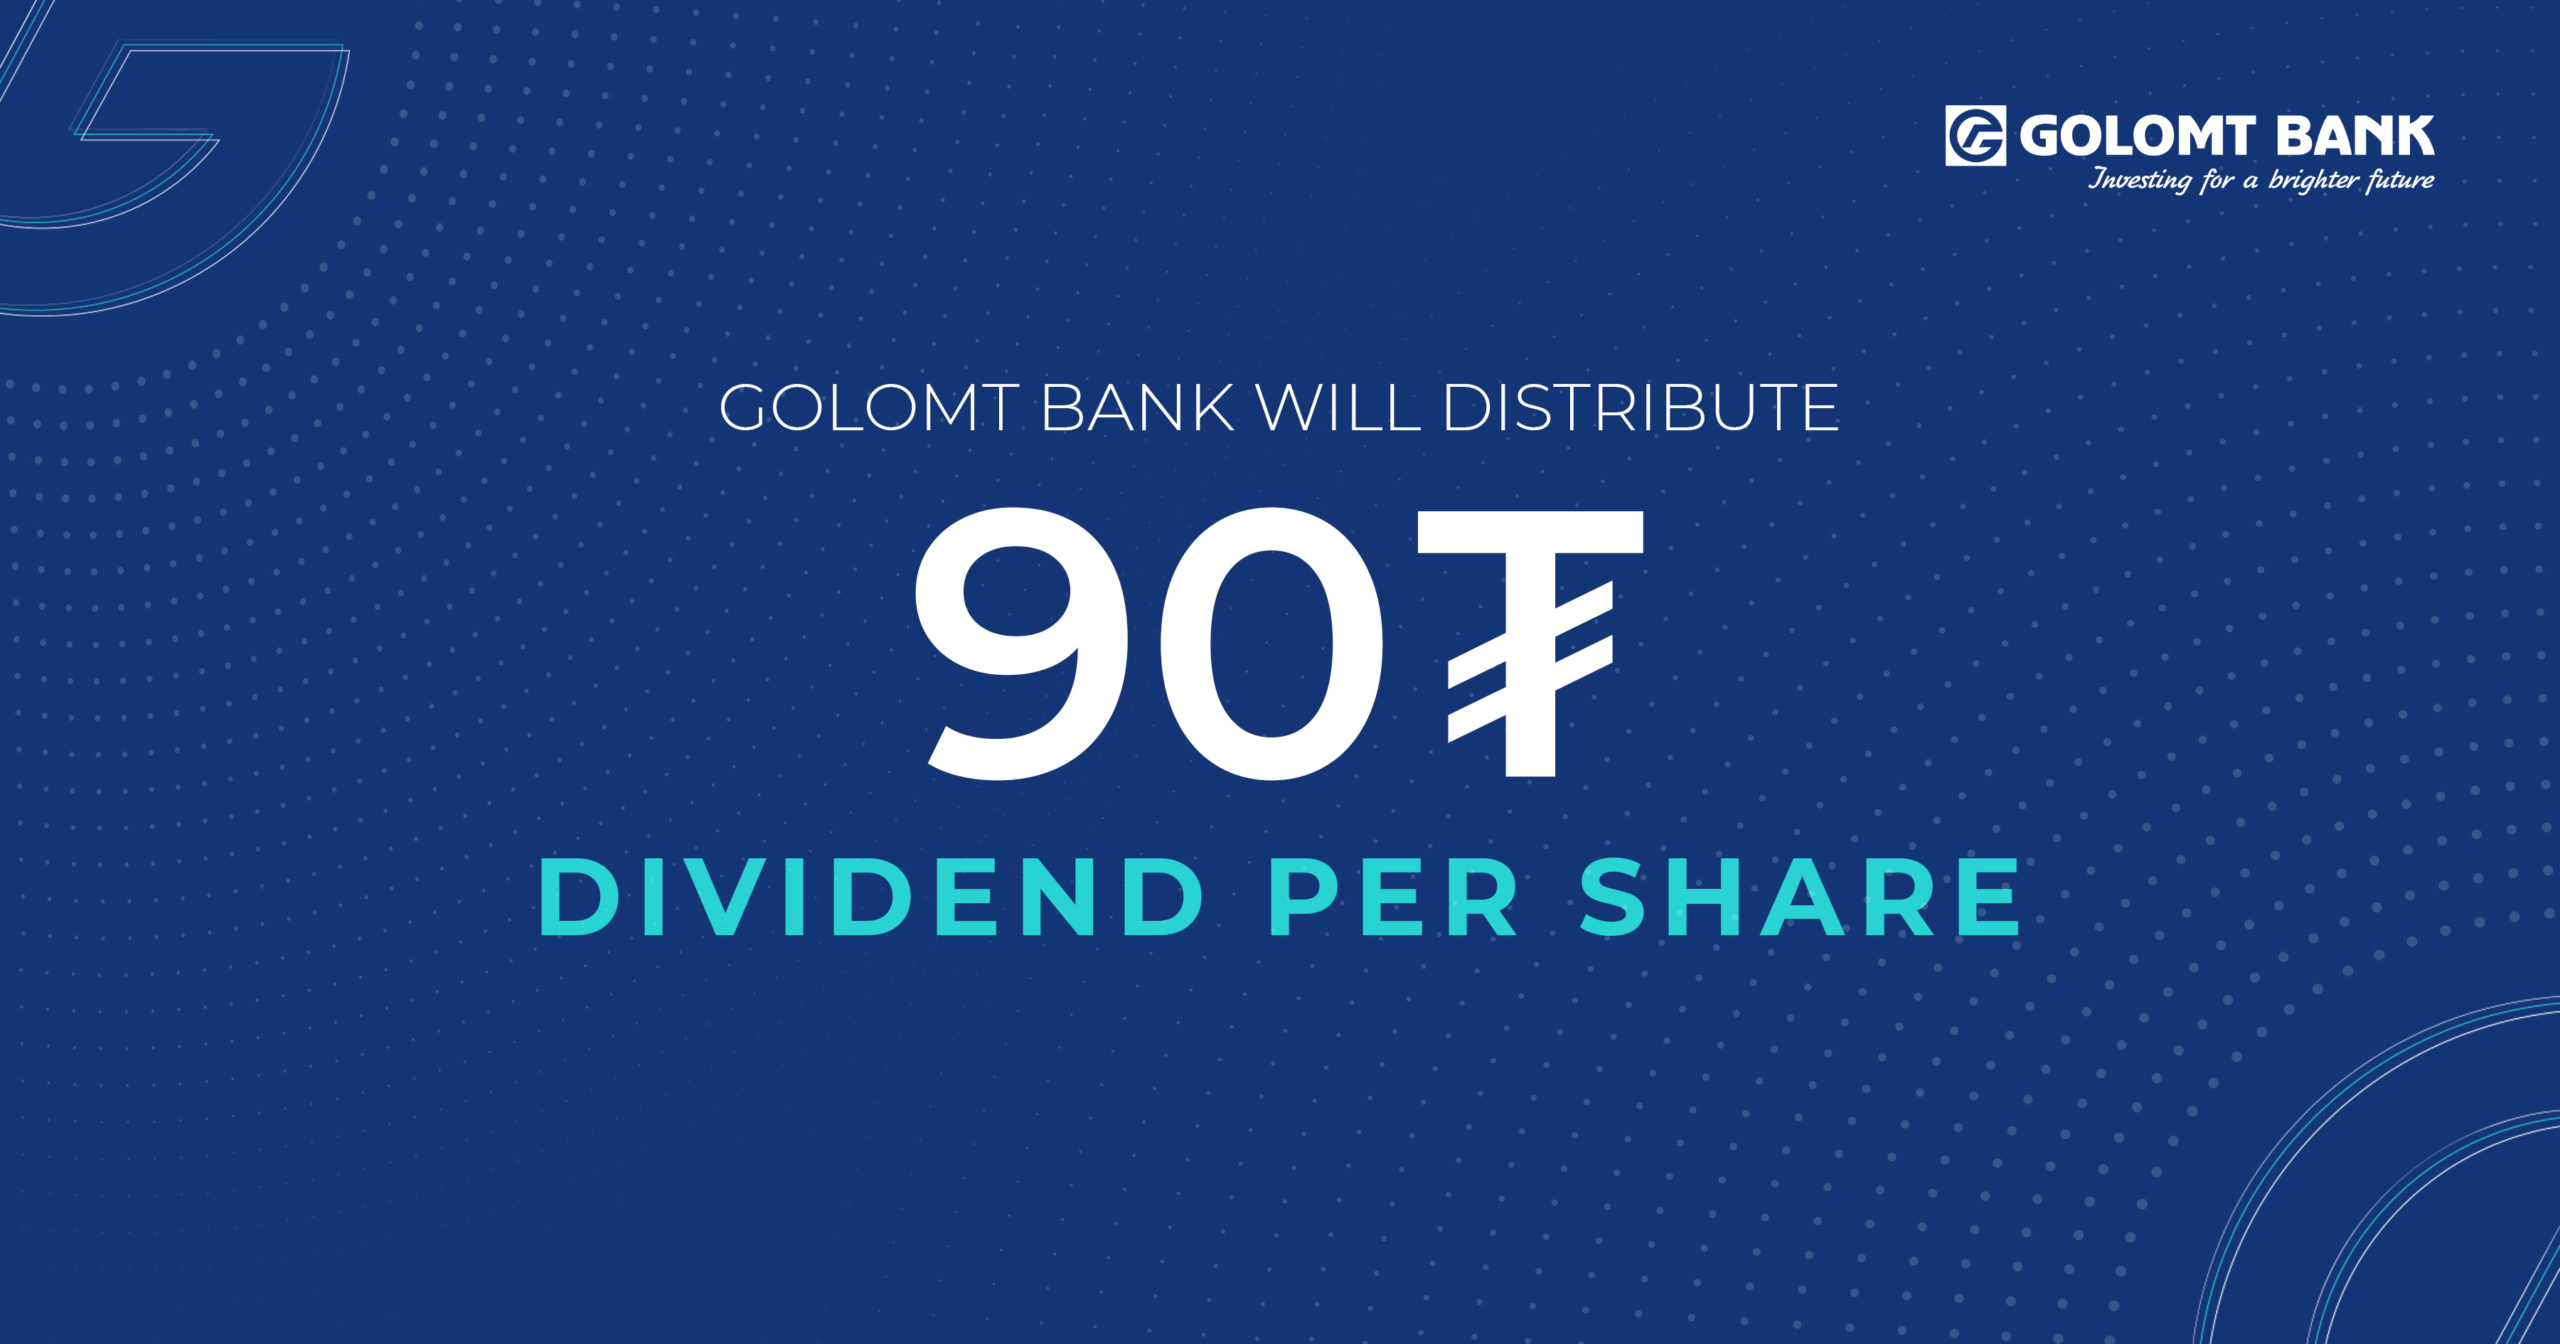 GOLOMT BANK WILL DISTRIBUTE MNT 90 DIVIDEND PER SHARE